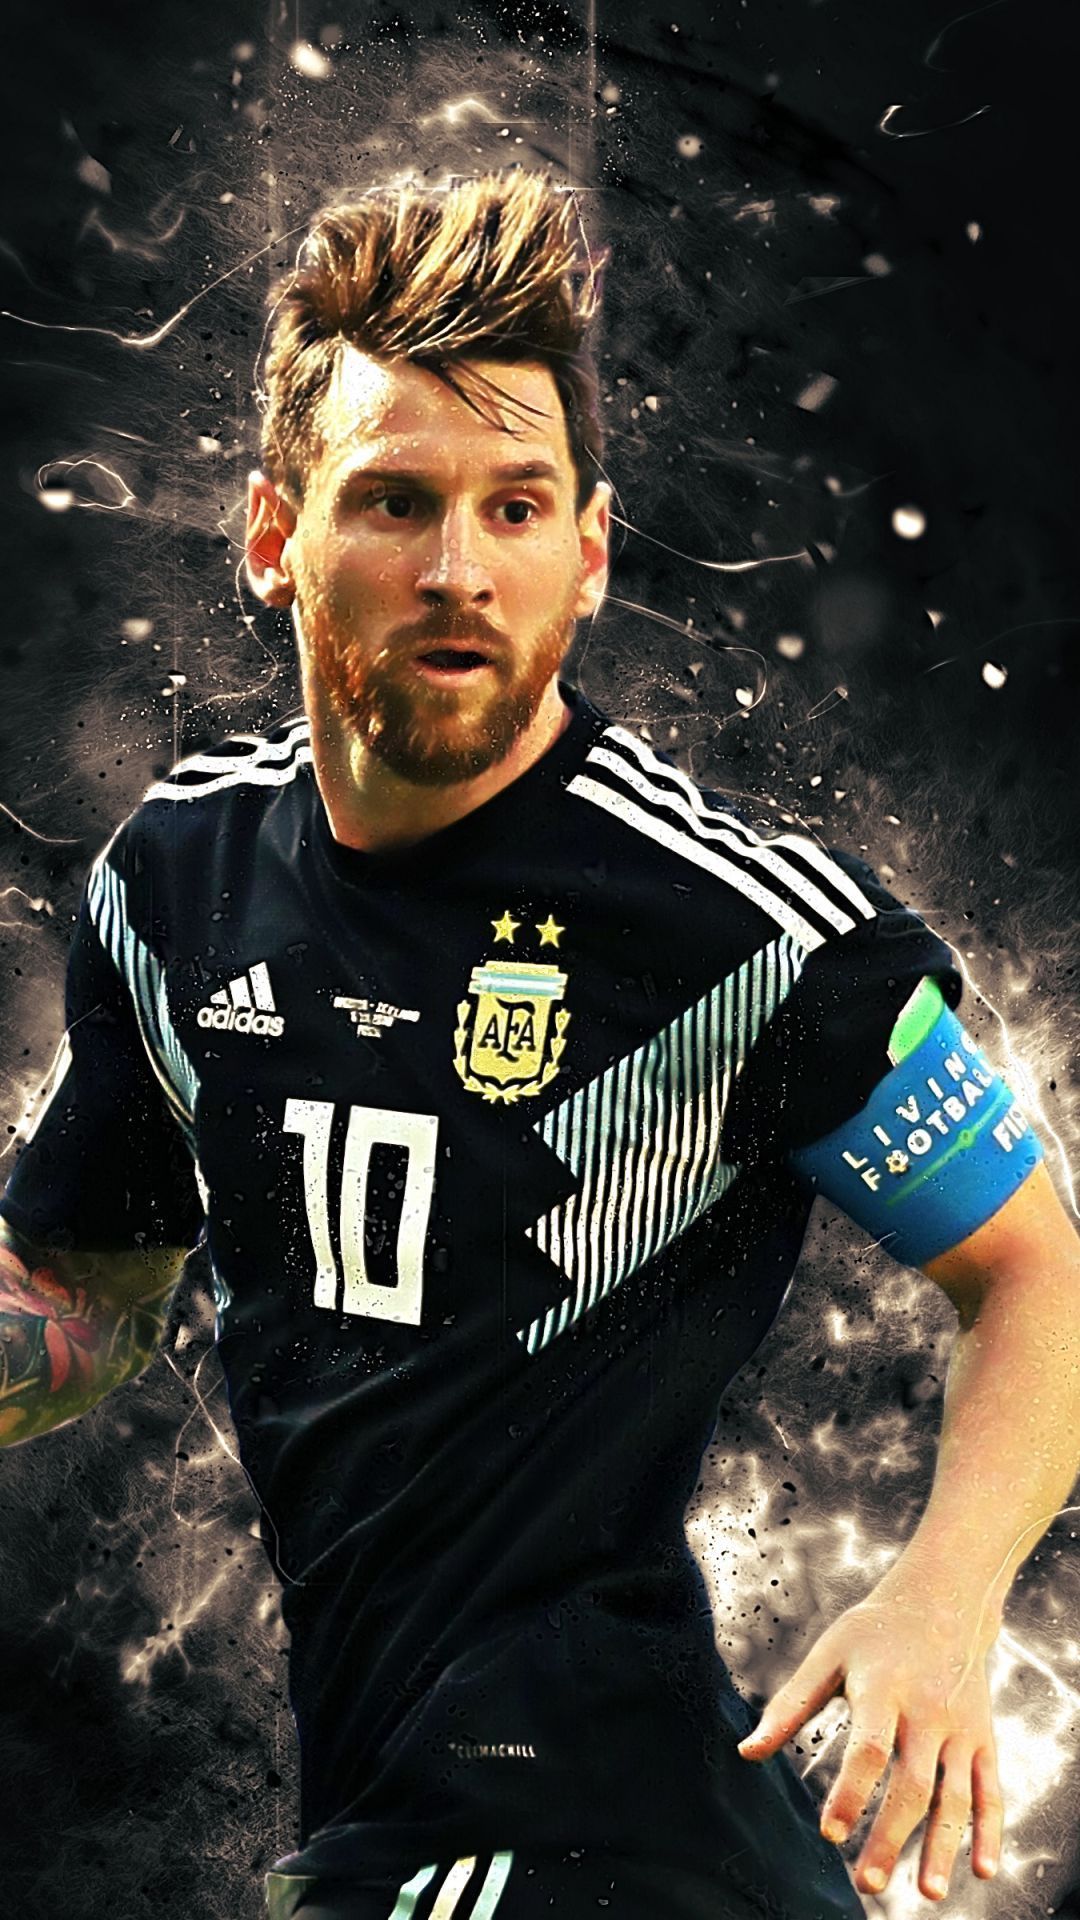 Messi HD Wallpaper Android Is Best Wallpaper on flowerswallpaper.info, if you like it. #iphone #android #wallpaper #Mes. HD wallpaper android, Messi, Lionel messi